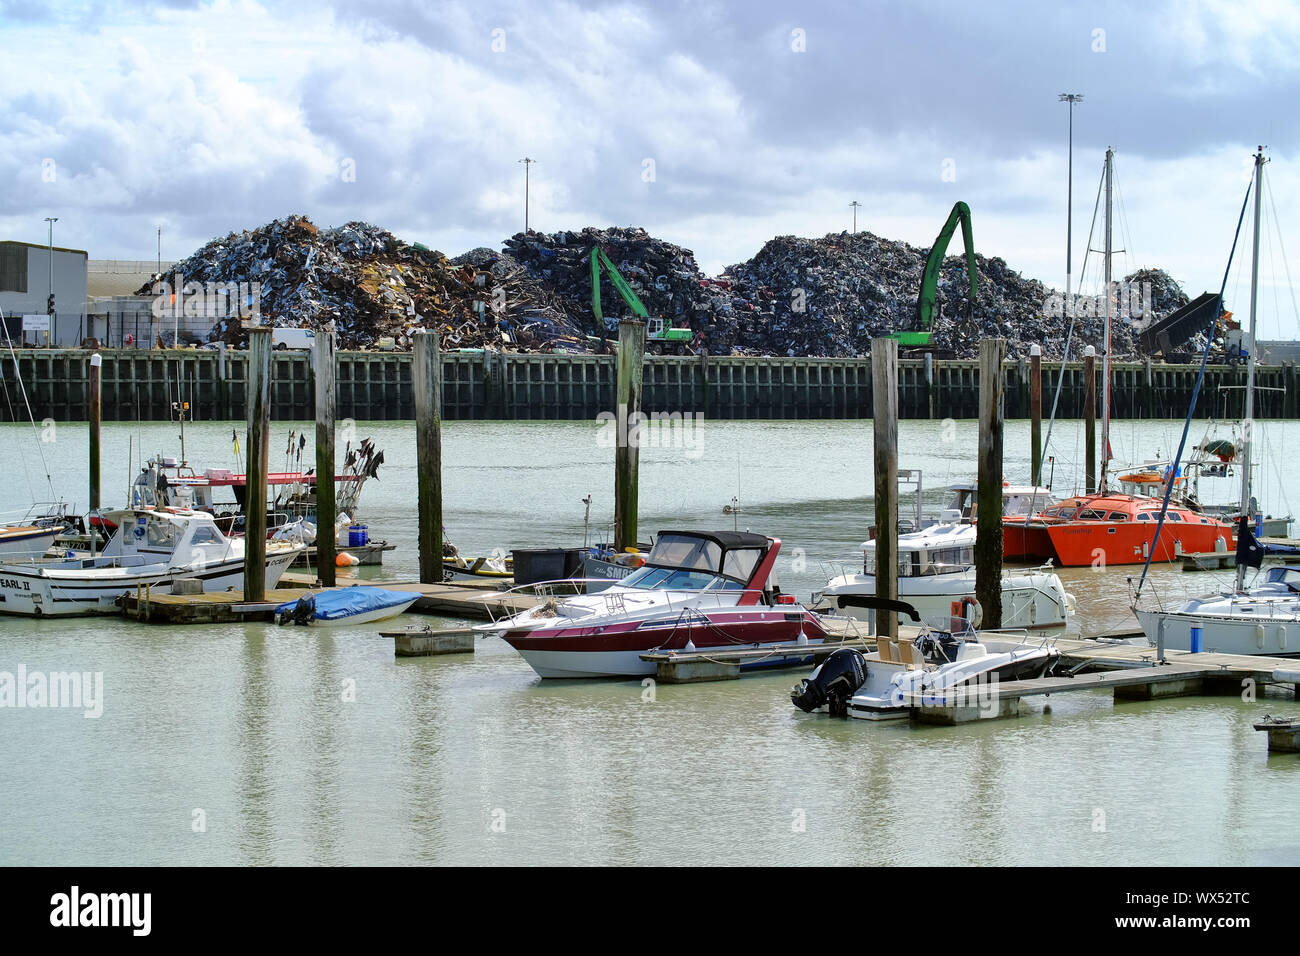 Scrap metal pile in Newhaven, East Sussex, situated next to the Marina and cross-channel ferry terminal. Stock Photo